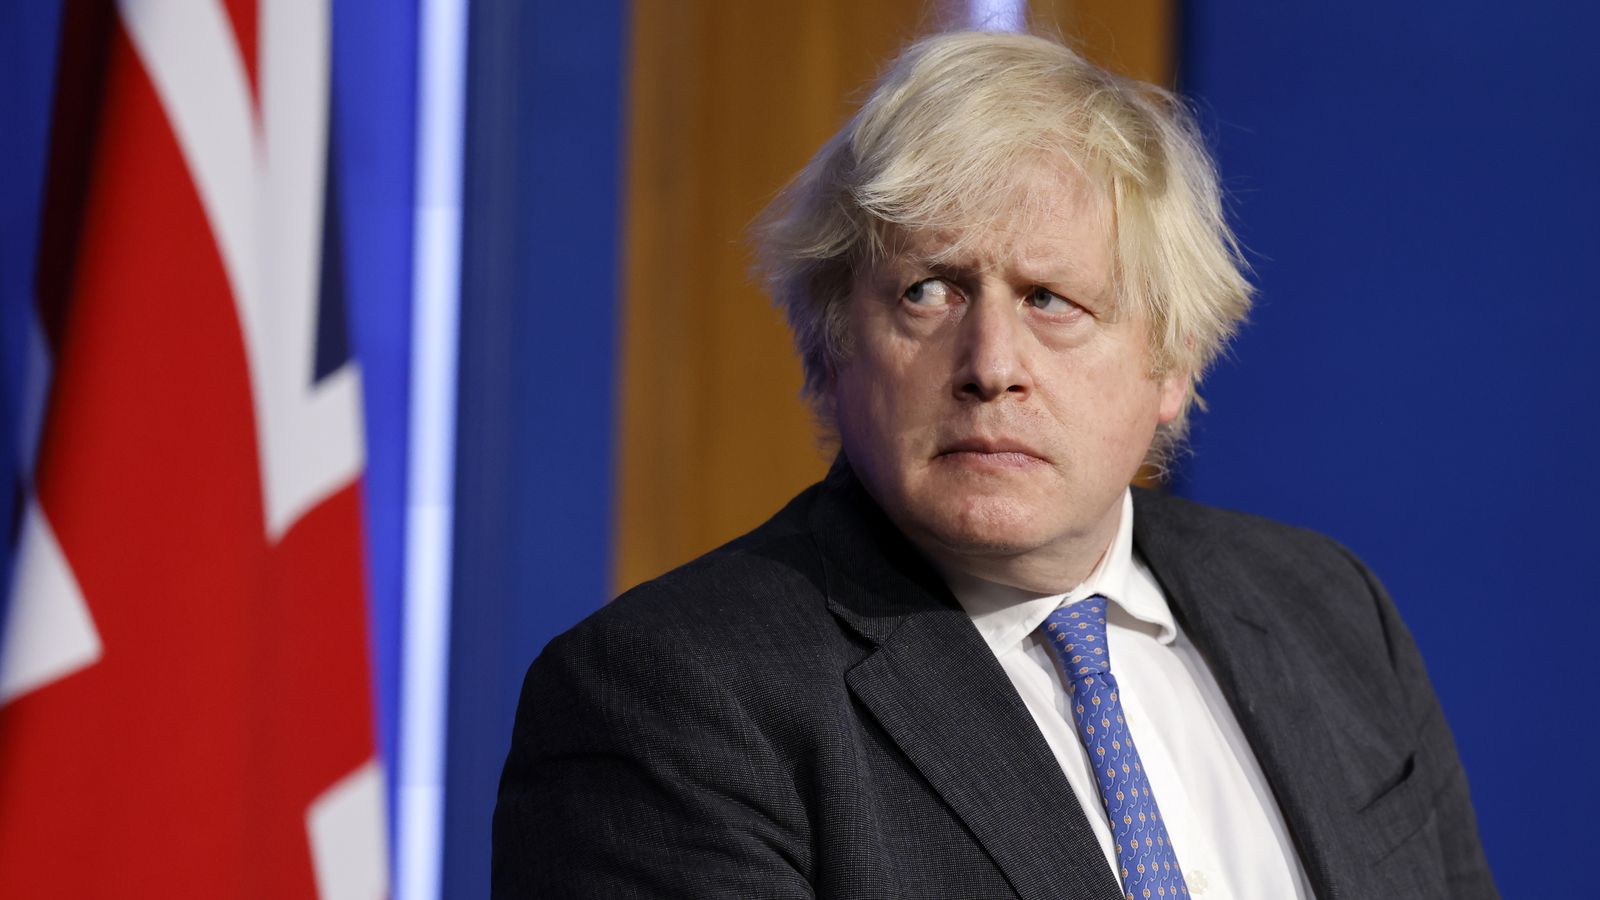 Will Boris Johnson resign as prime minister? Sky News politics team tell us what they're hearing